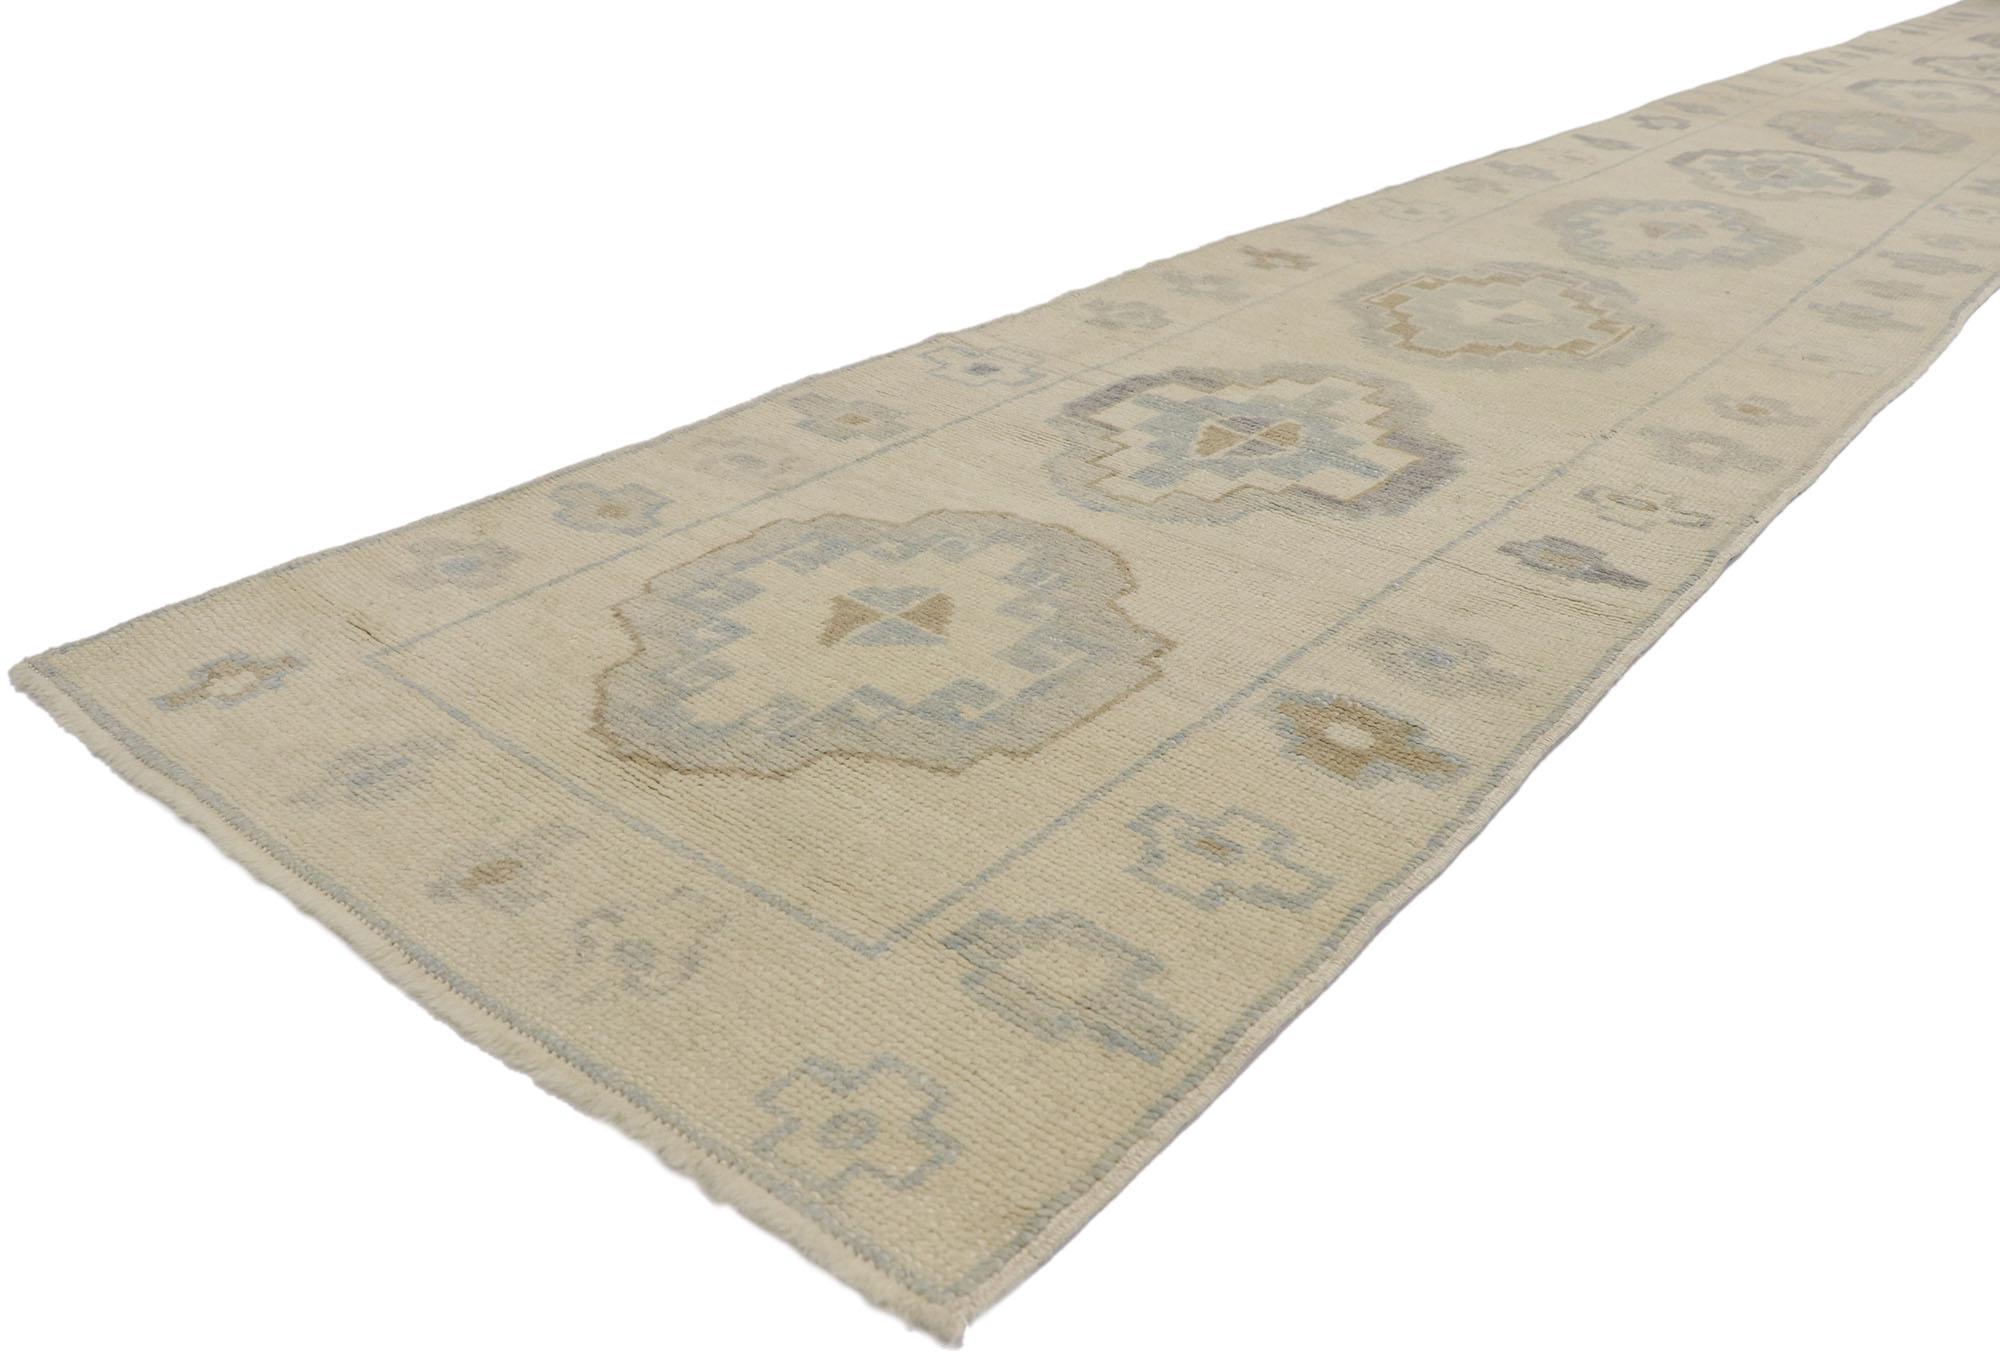 53589 New Contemporary Turkish Oushak Runner with Modern Style 02'09 x 21'01. This hand-knotted wool contemporary Turkish Oushak runner features an all-over geometric pattern spread across an abrashed oatmeal-beige striated field. An array of